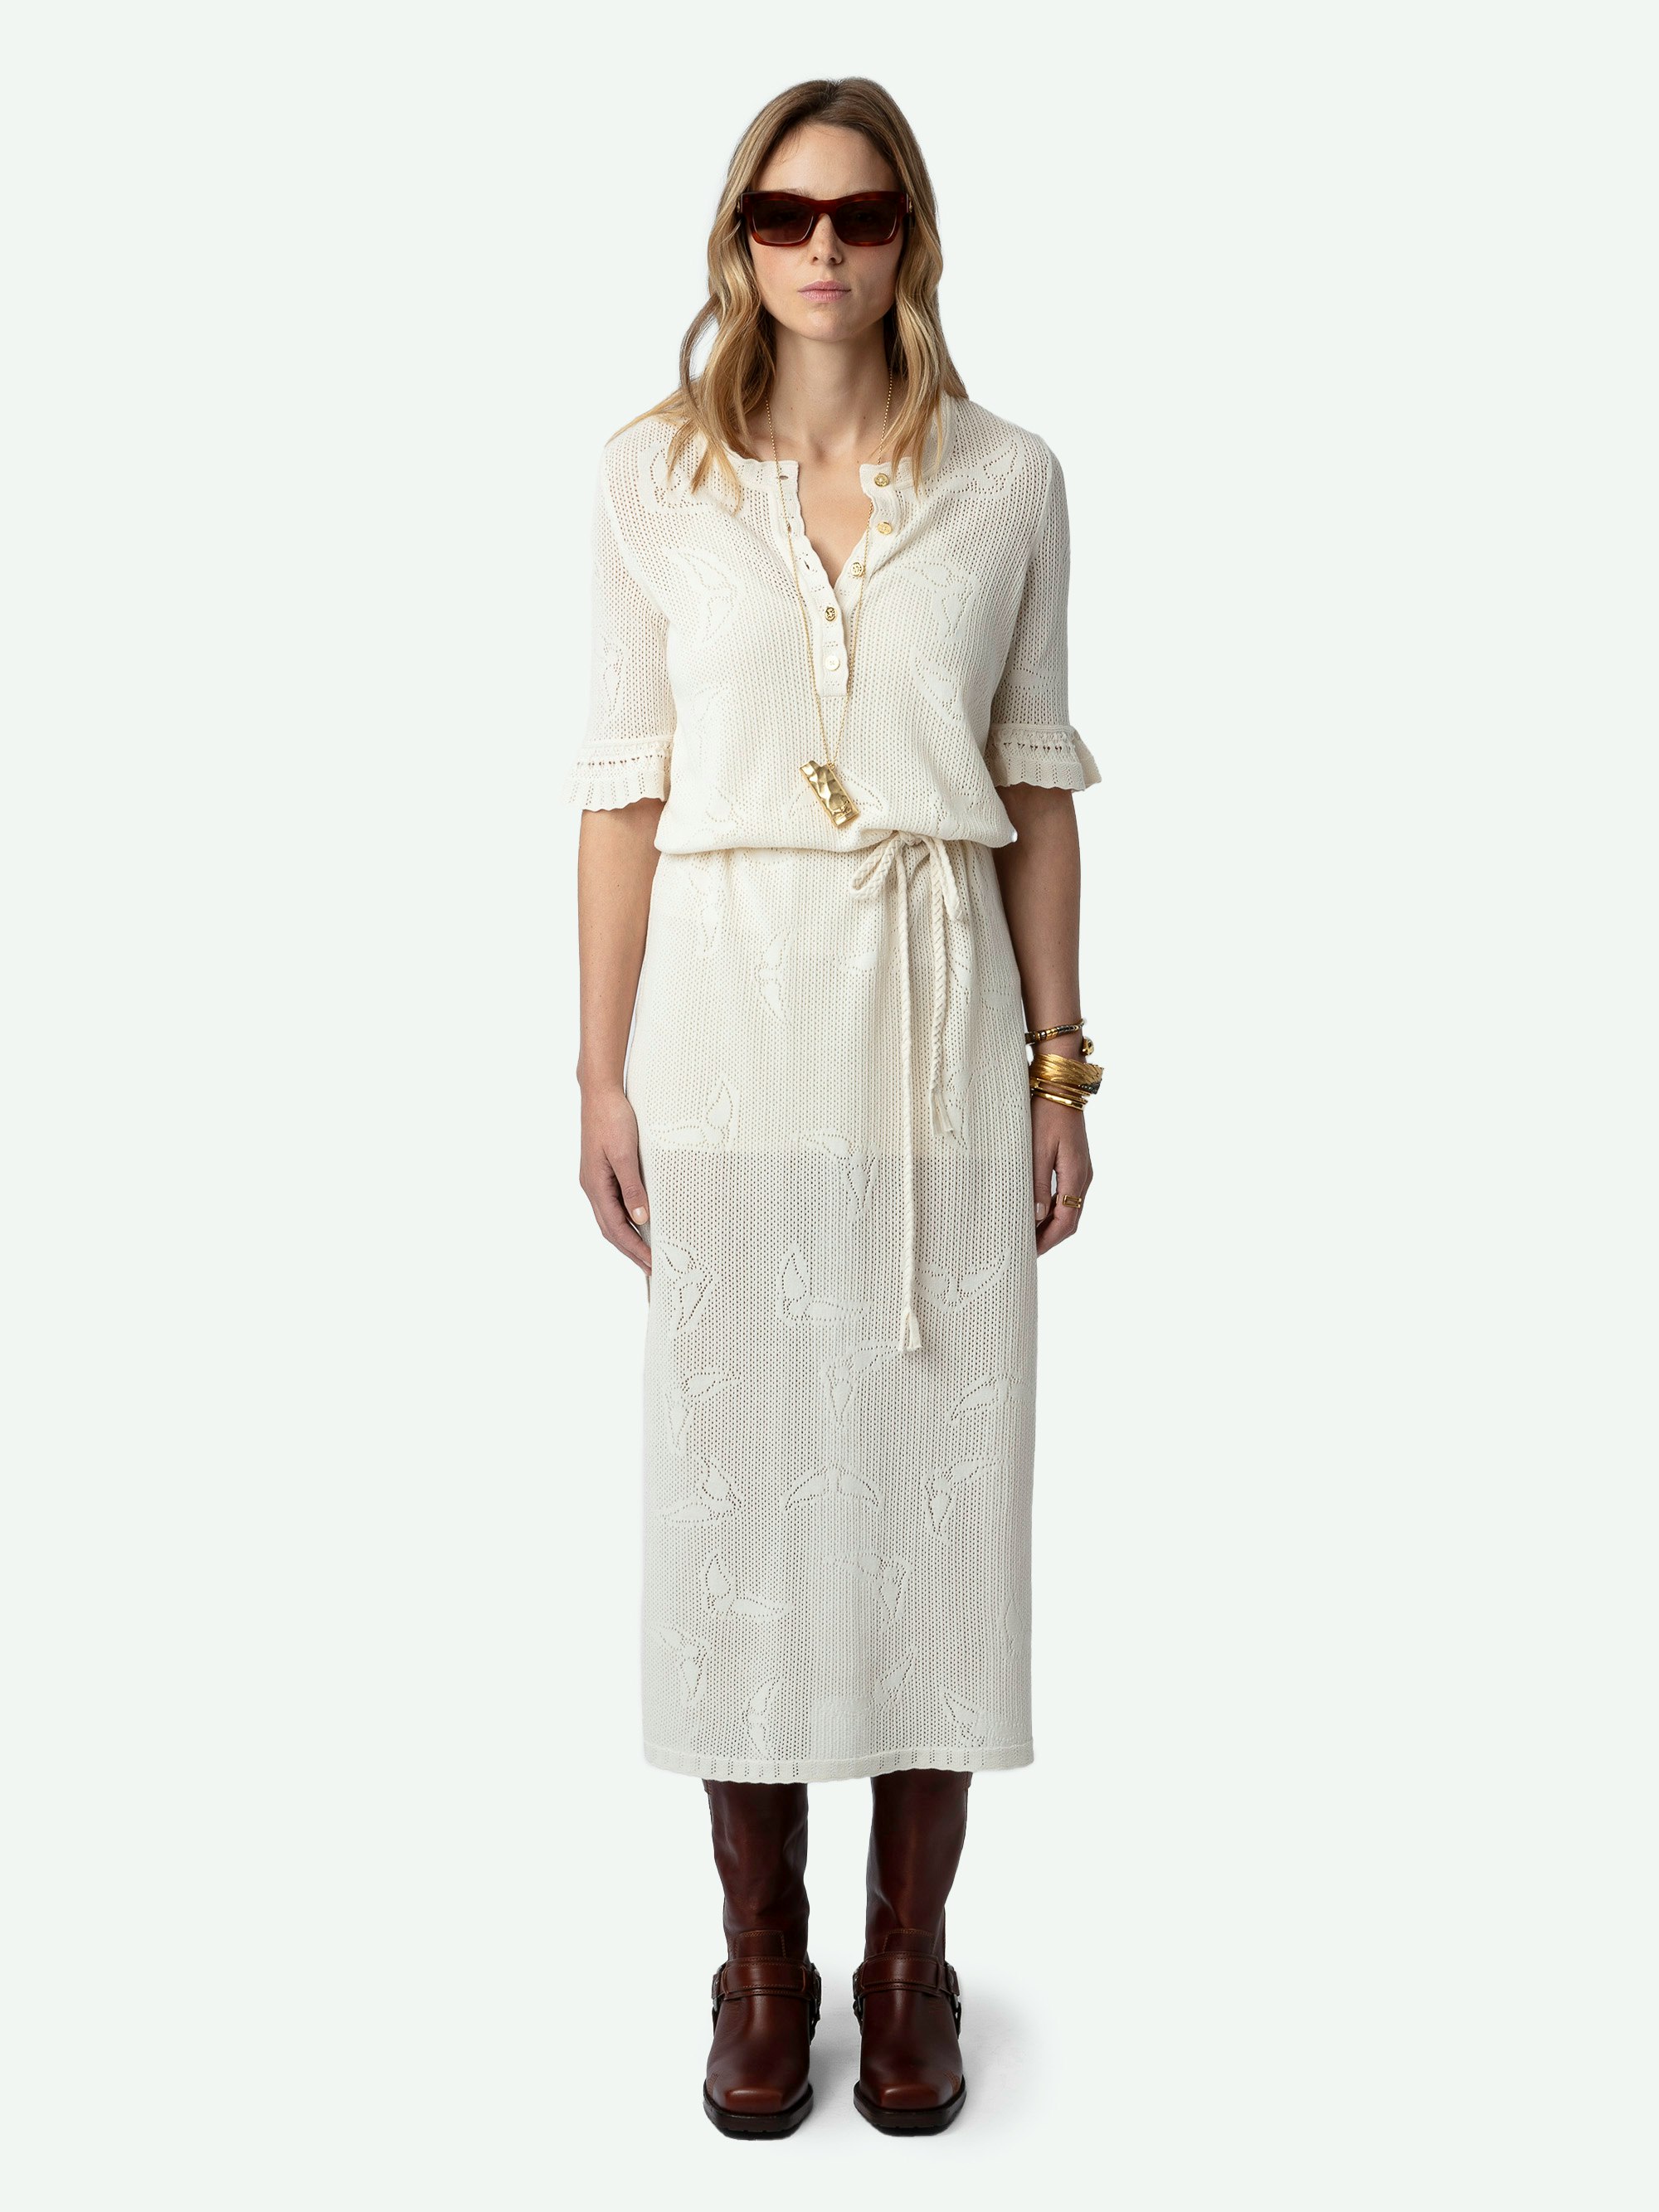 Salmy Wings Dress - Ecru cotton pointelle knit maxi dress with wing motifs, short ruffled sleeves and removable belt.